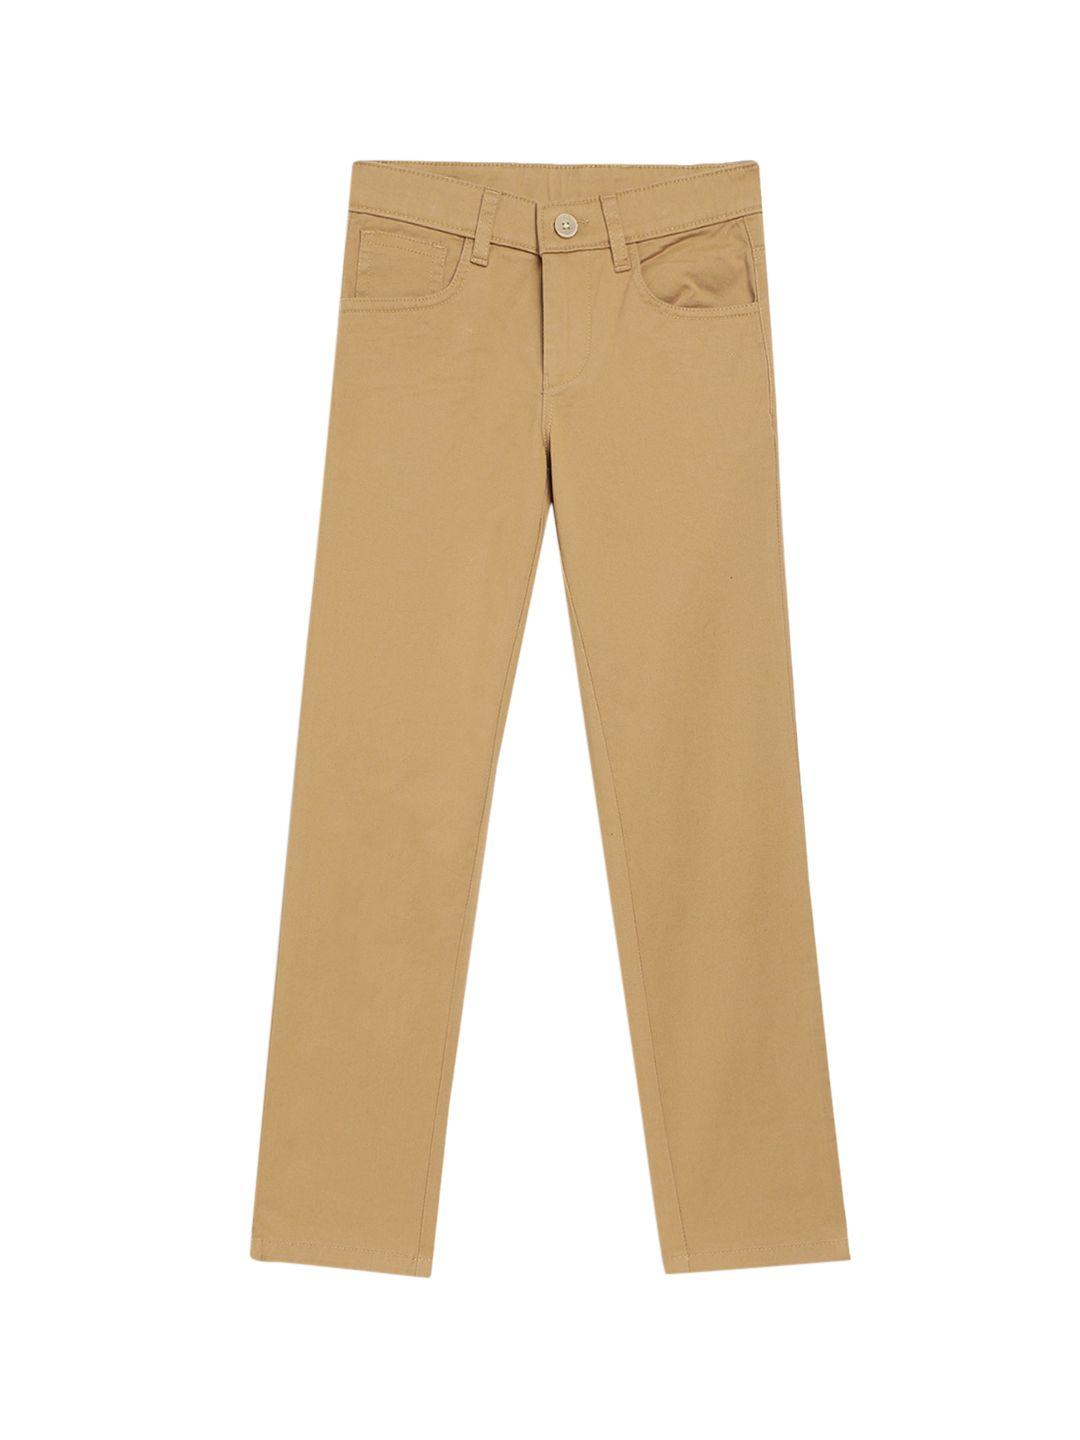 cantabil-boys-beige-chinos-trousers